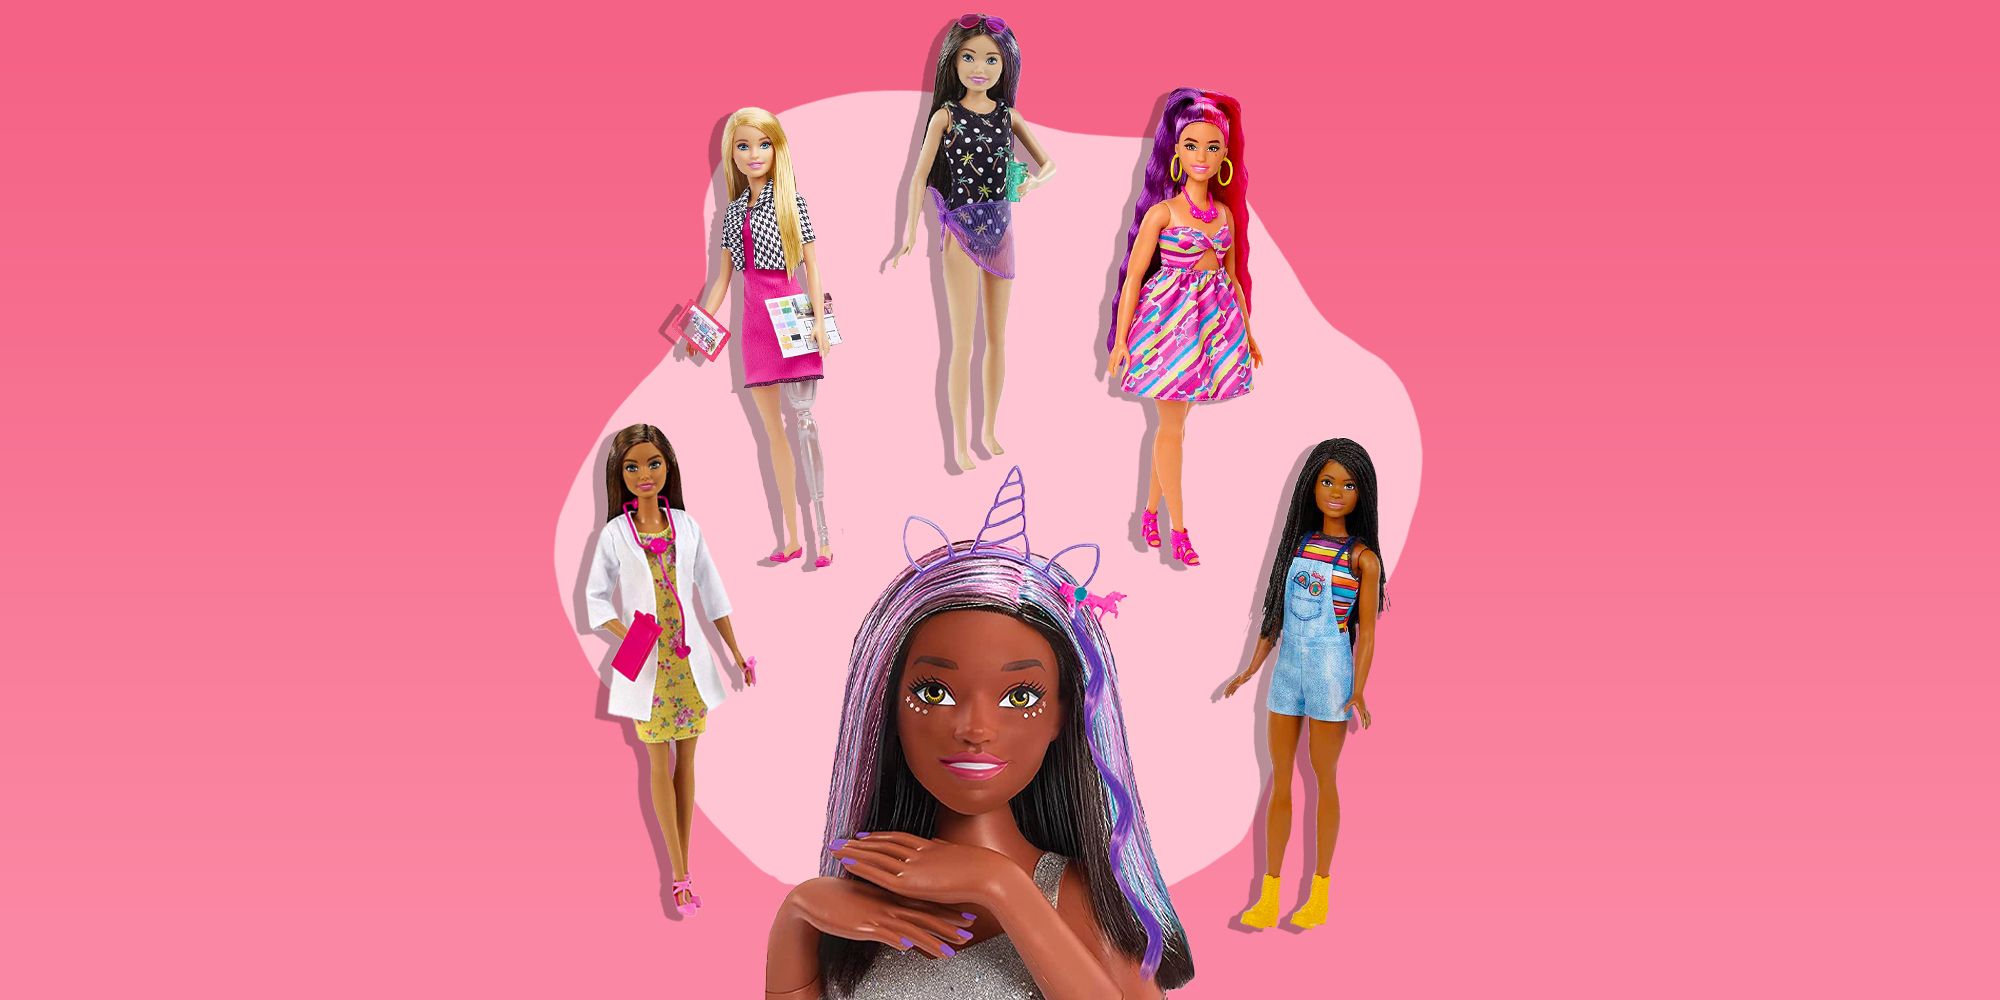 20 Best Barbie Toys to Buy in 2023 - Barbie Dolls for Kids